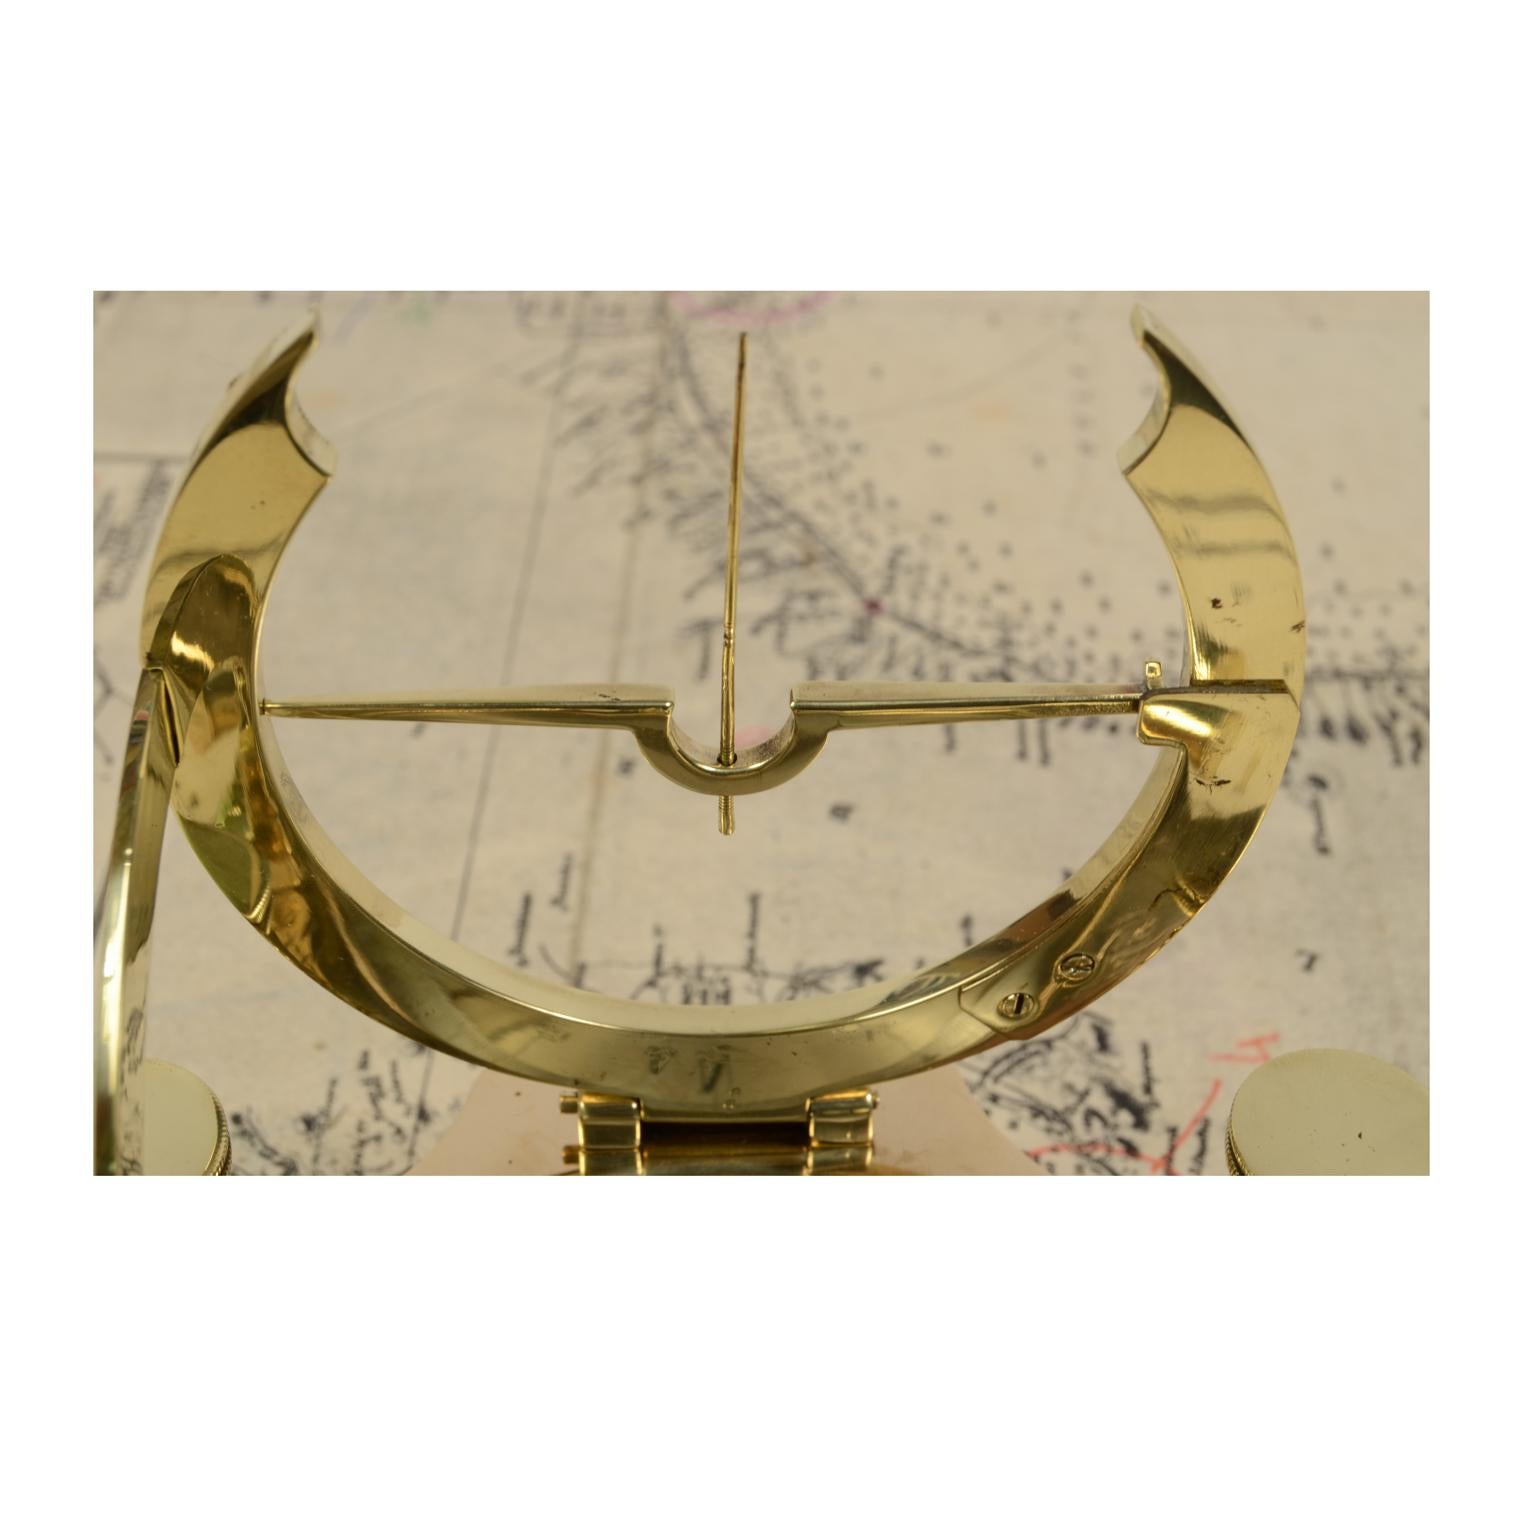 Equinoctial Sundial Engraved Brass and Glass Time Measuring Instrument UK 1840 4